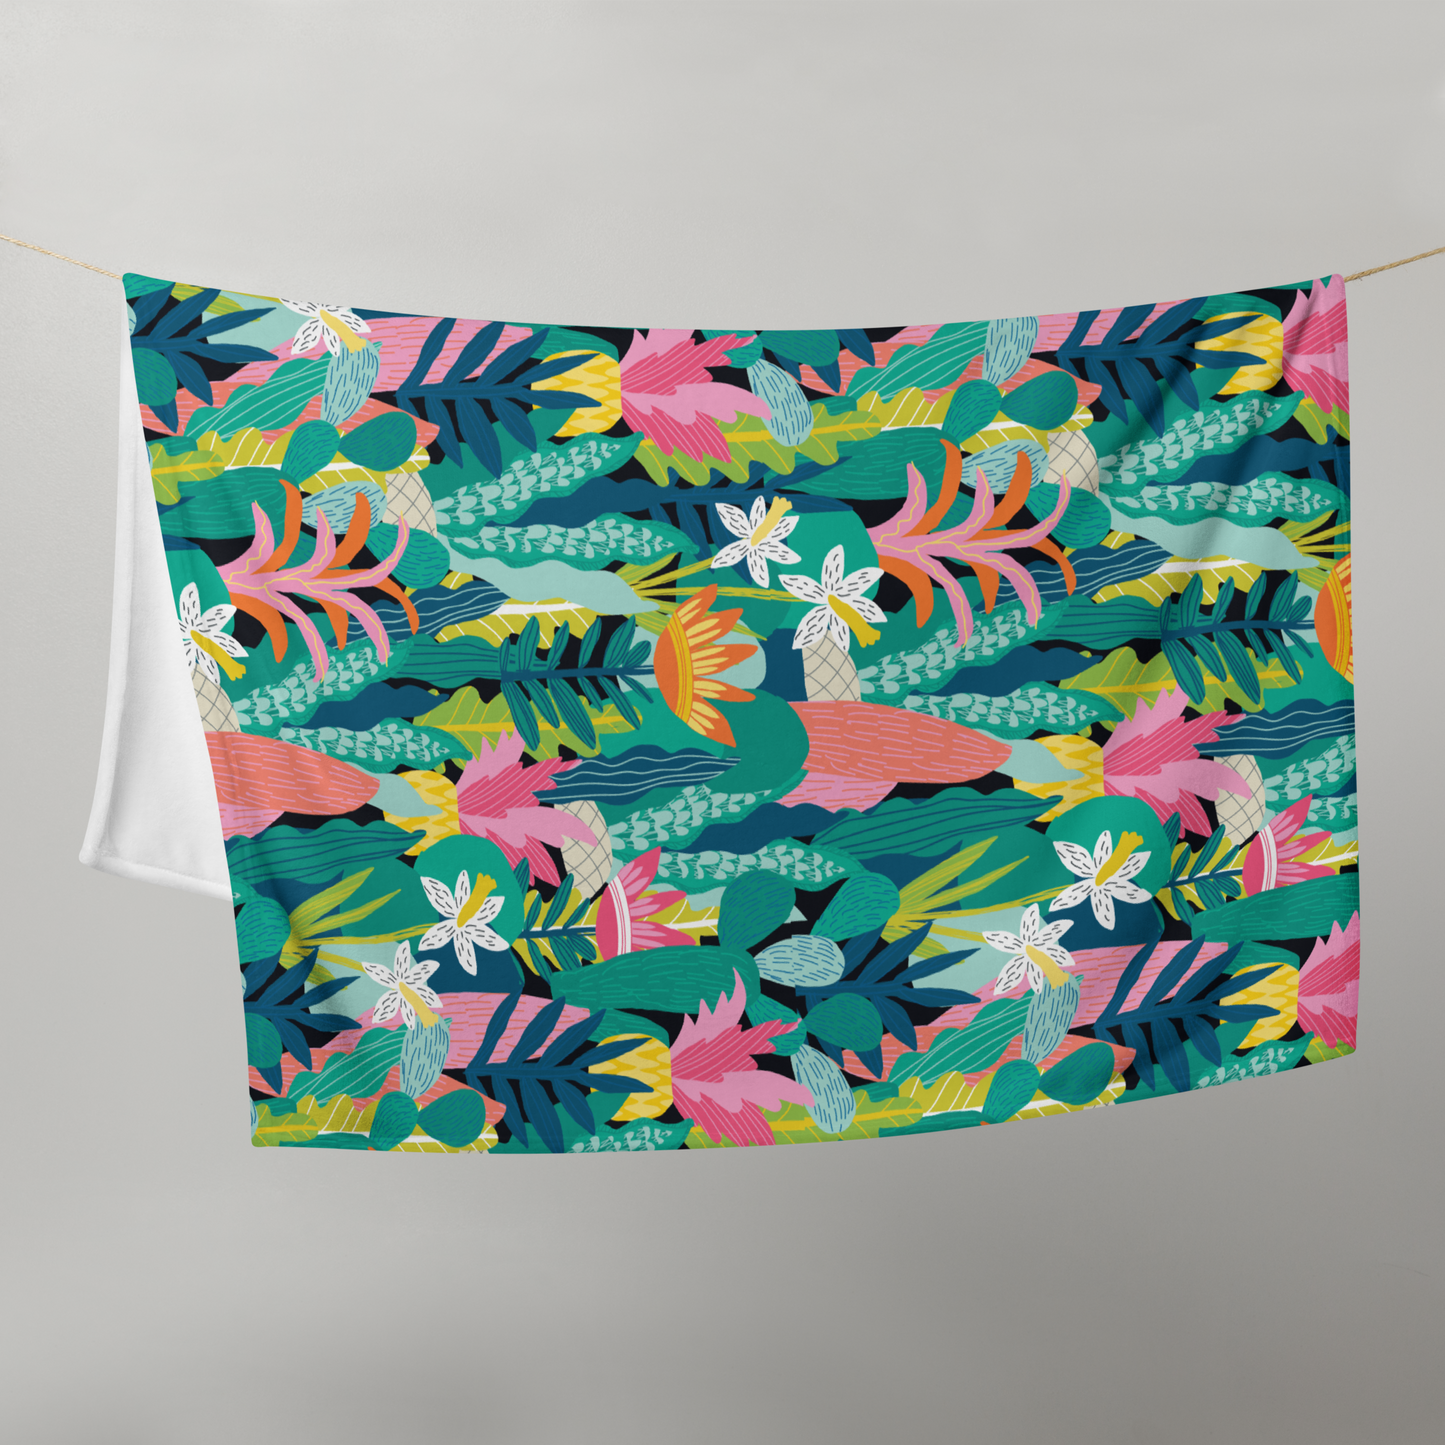 Green Whimsy Jungle Throw Blanket